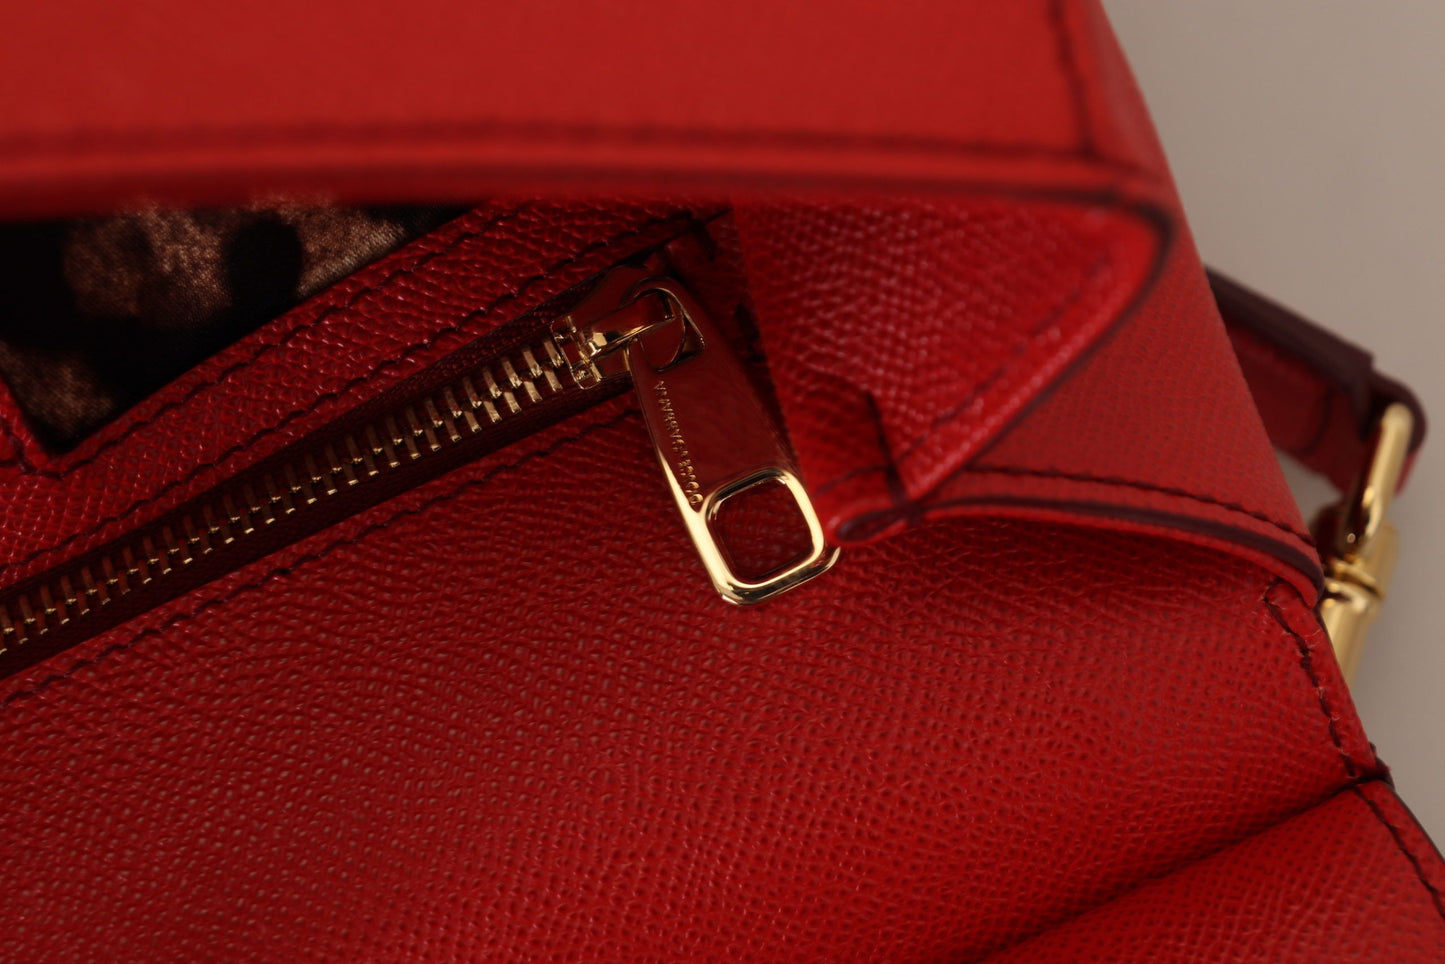 Sicily Bag in Red Leather with Gold Accents